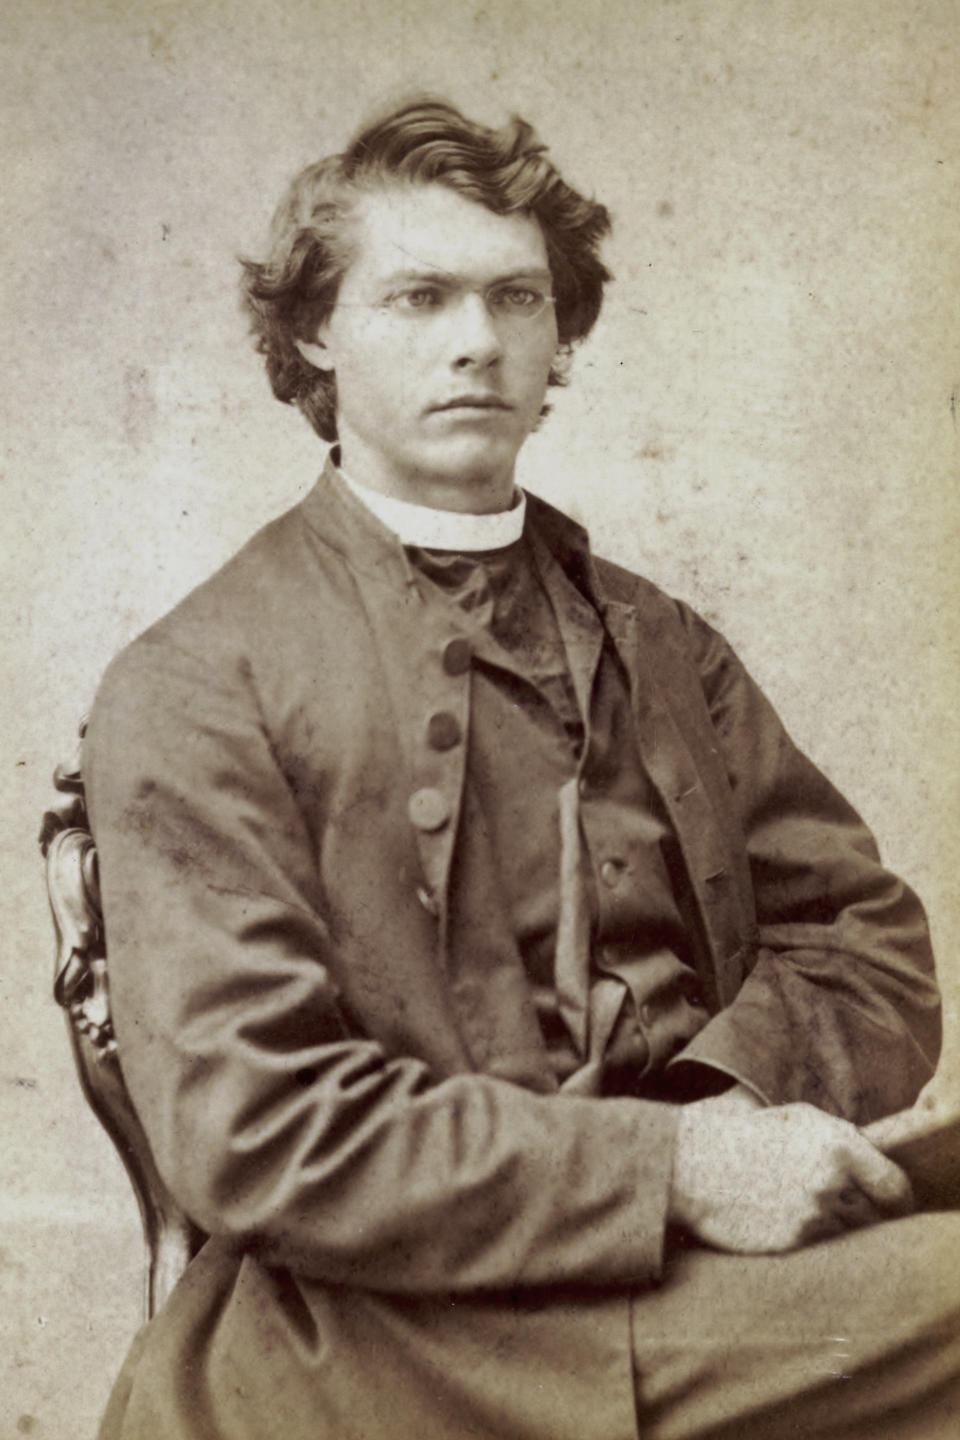 This photo provided by the Presentation Sisters Archives in October 2023 shows an undated portrait of the Rev. Robert W. Haire, a socialist Catholic priest and influential direct democracy advocate who lived in Aberdeen, South Dakota, in the late 1800s and early 1900s. (Presentation Sisters Archives via AP)